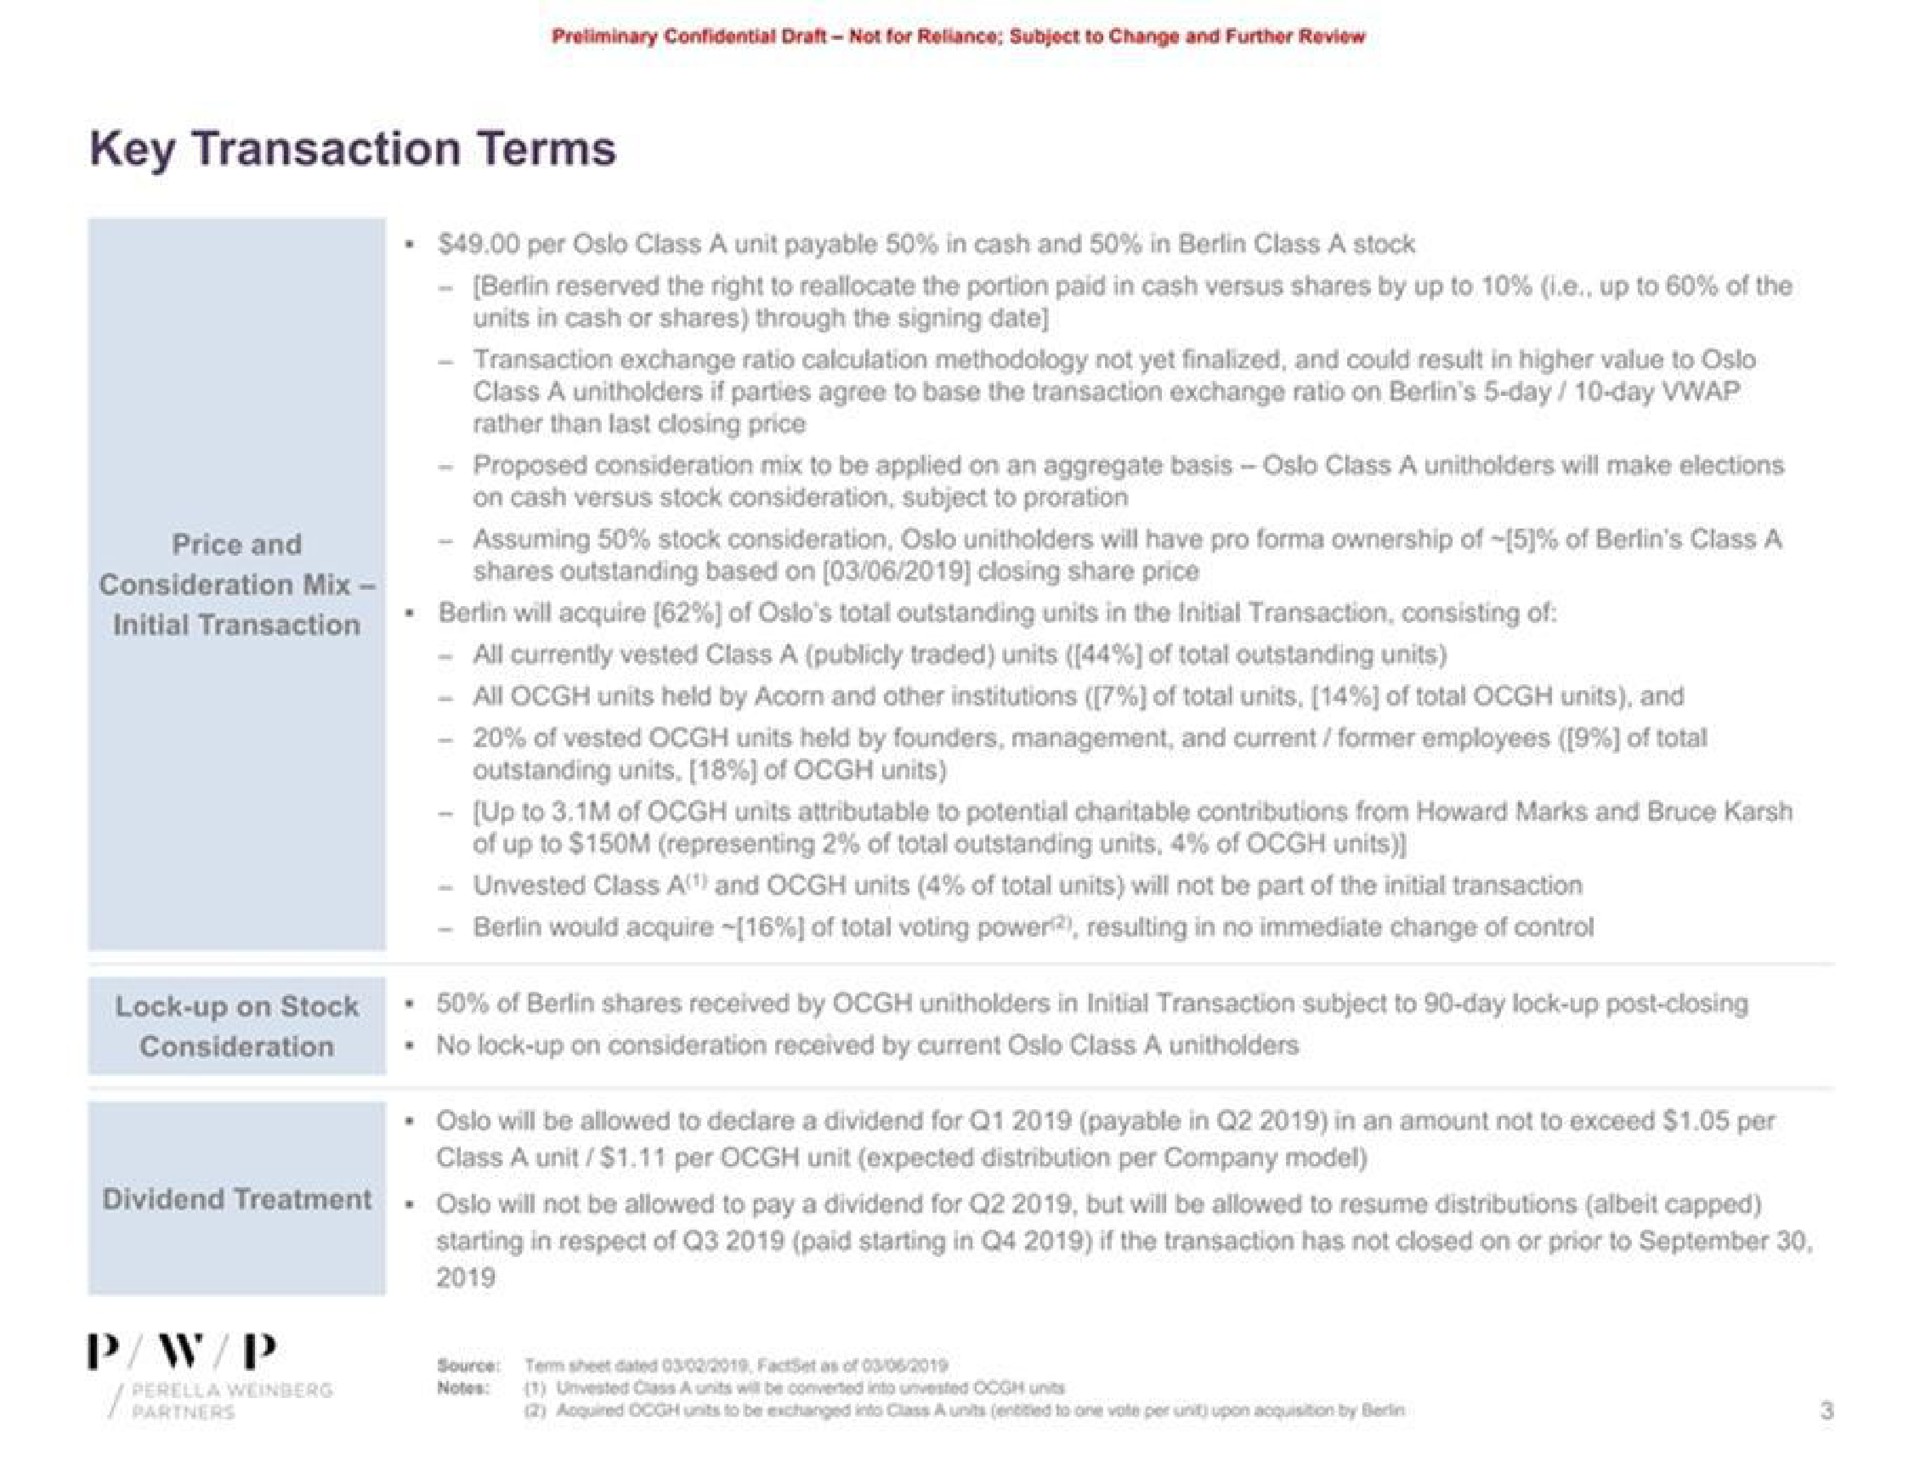 confidential draft not for reliance subject to change and further review key transaction terms all currently vested class a publicly traded units of total outstanding units consideration no lock up on consideration received by current class a dividend treatment will not be allowed to pay a dividend for but will be allowed to resume distributions albeit capped | Perella Weinberg Partners